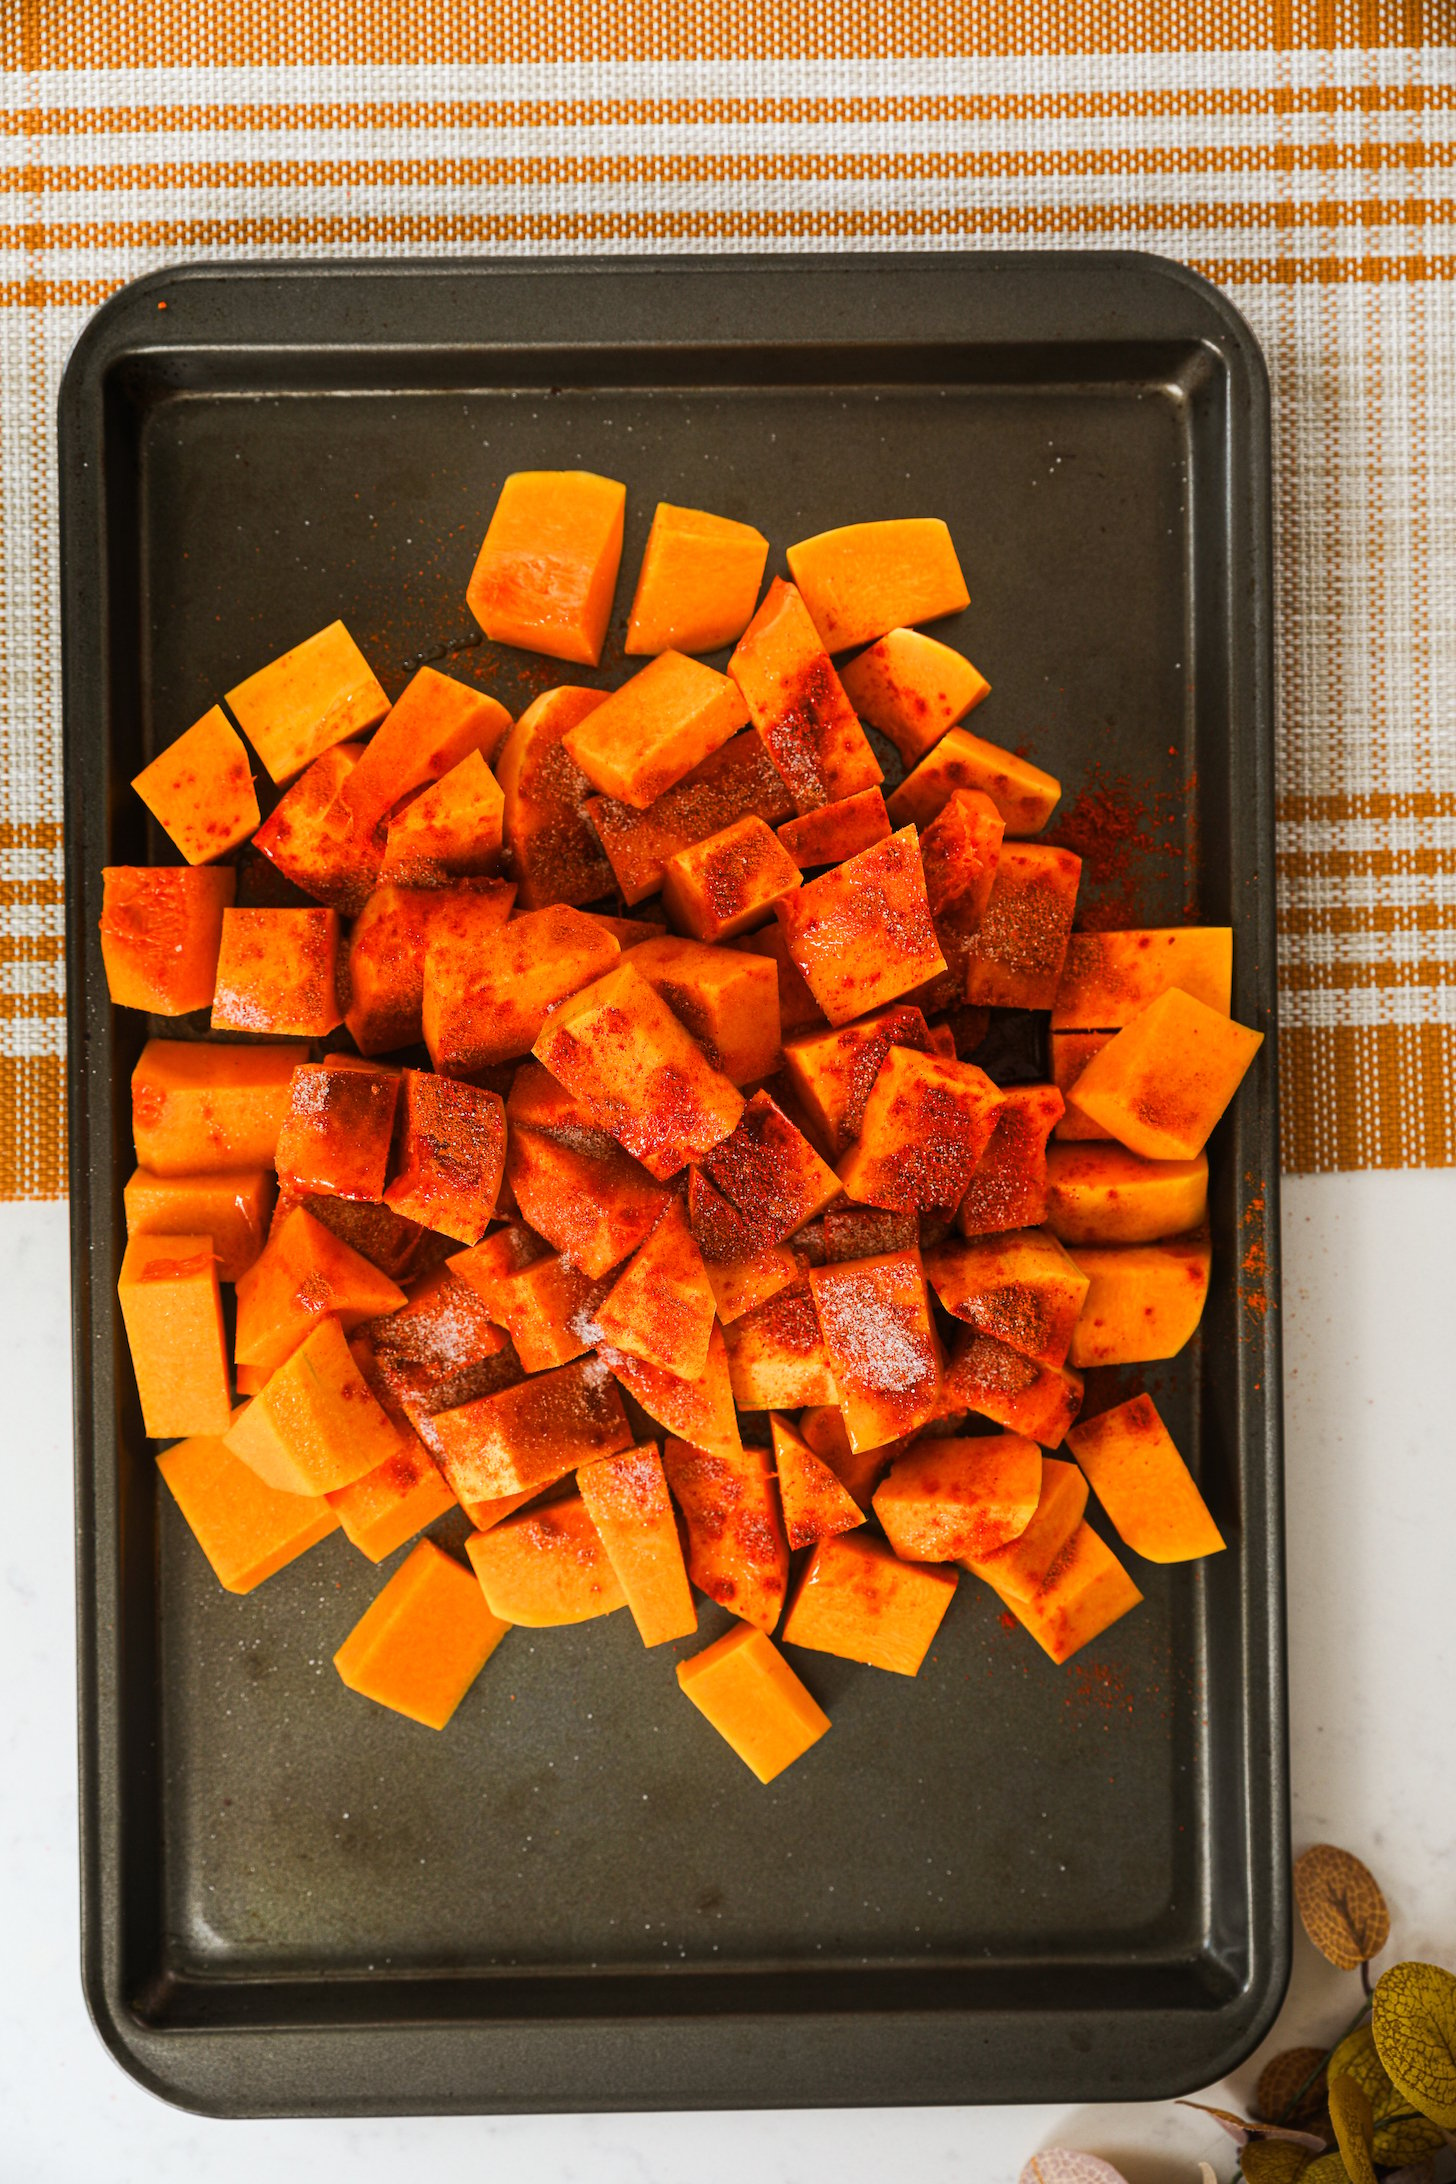 A mound of butternut chunks generously dusted with powdered spices, arranged on an oven tray.